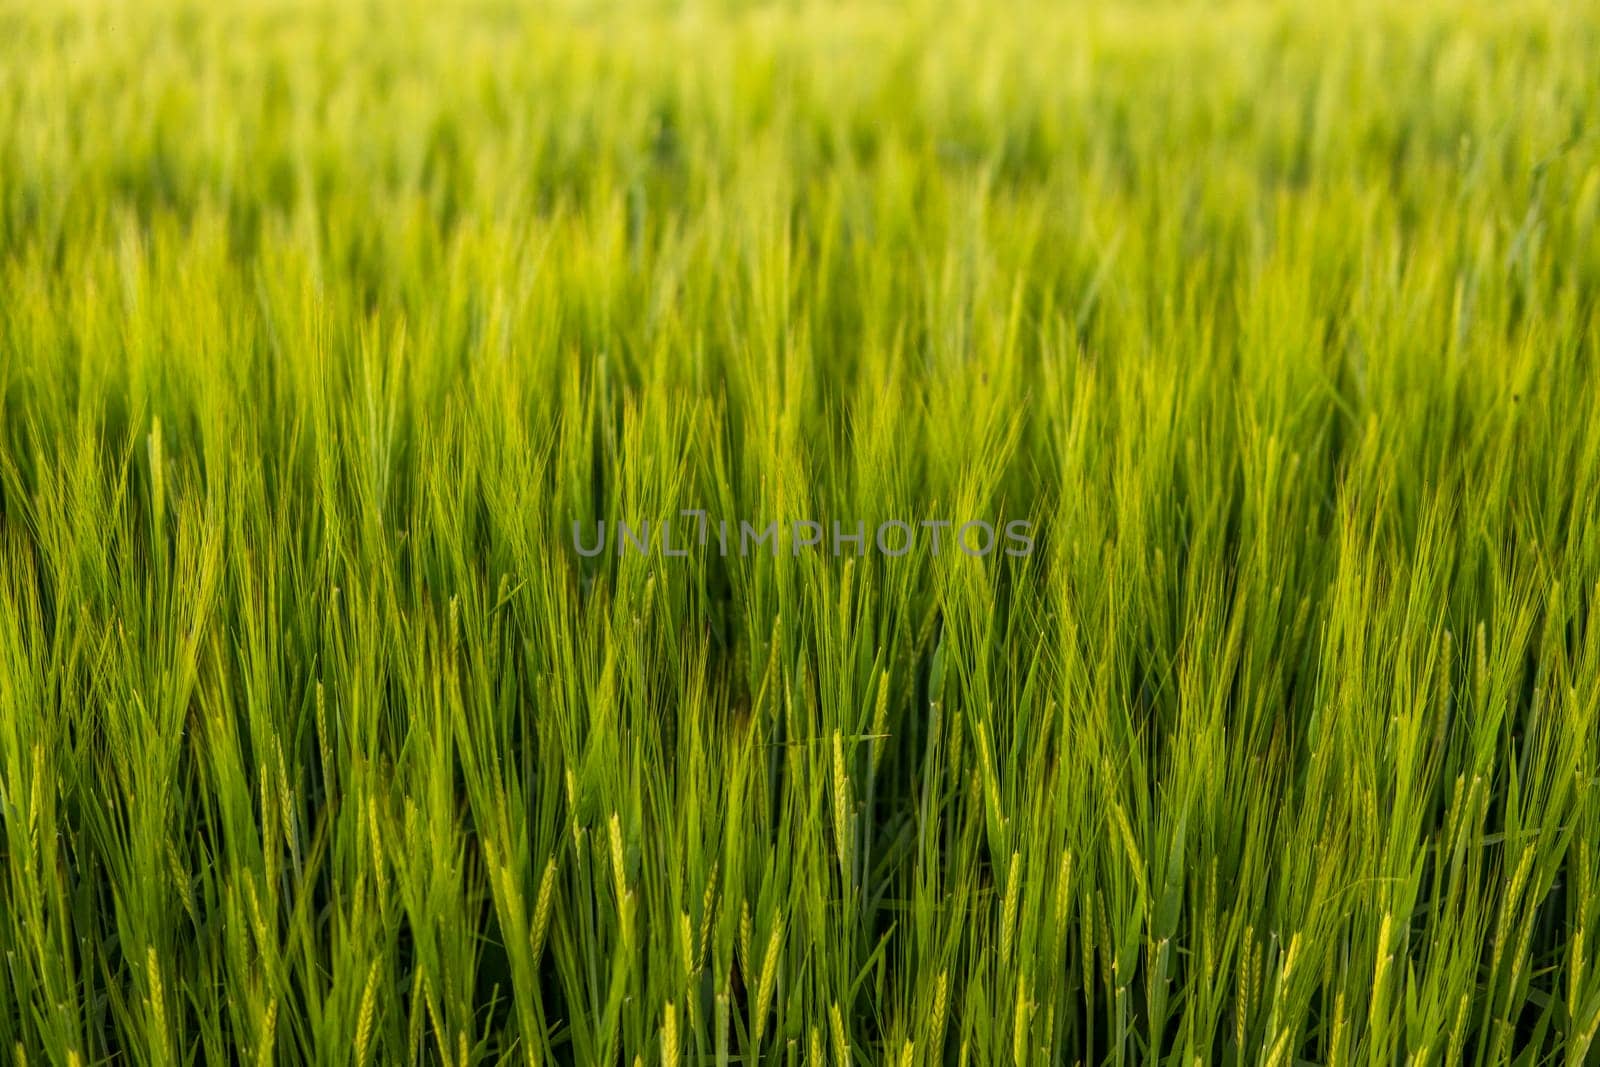 Green young unripe juicy spikelets of barley on a agricultural field. Harvest in spring or summer. Agriculture. by vovsht